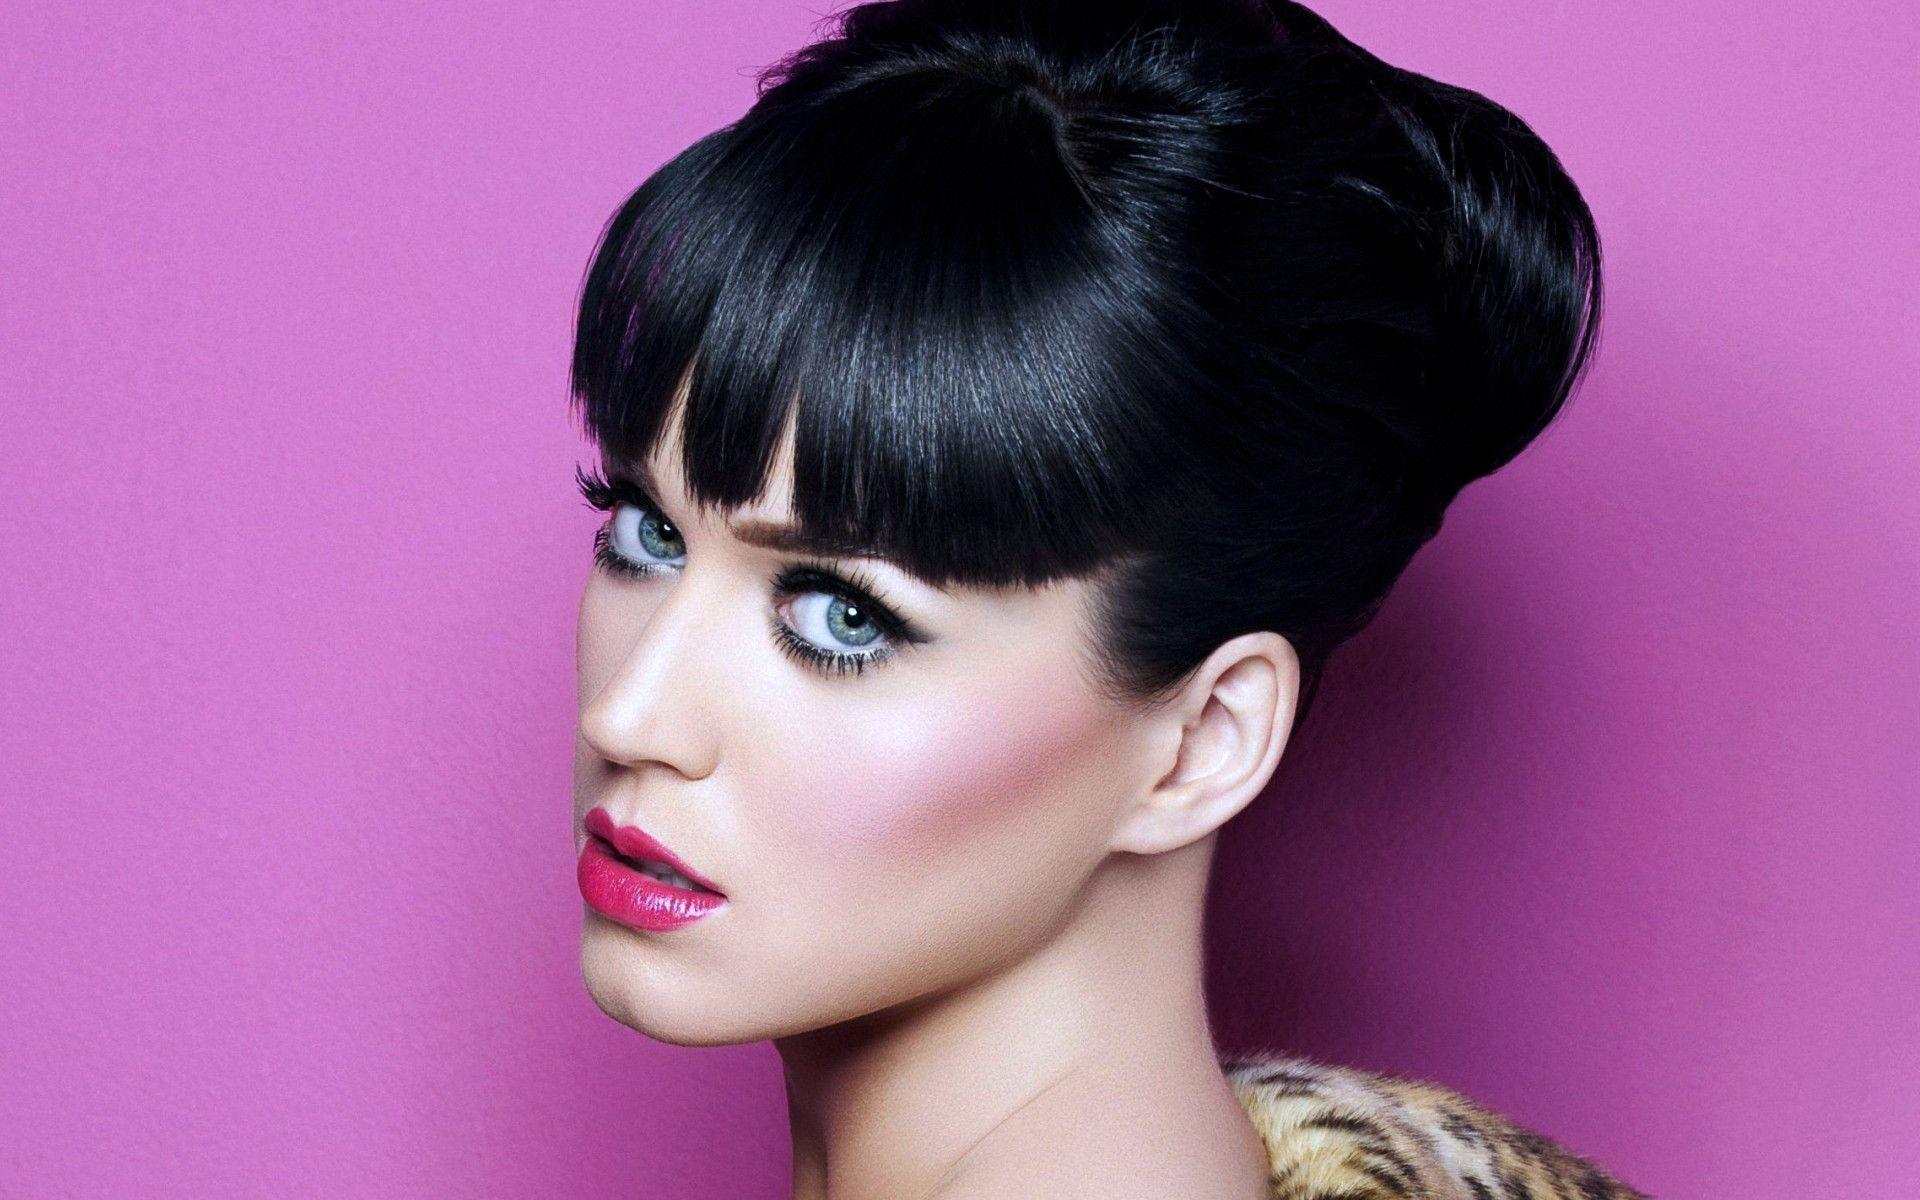 Wallpaper For > Katy Perry Pink Wallpaper